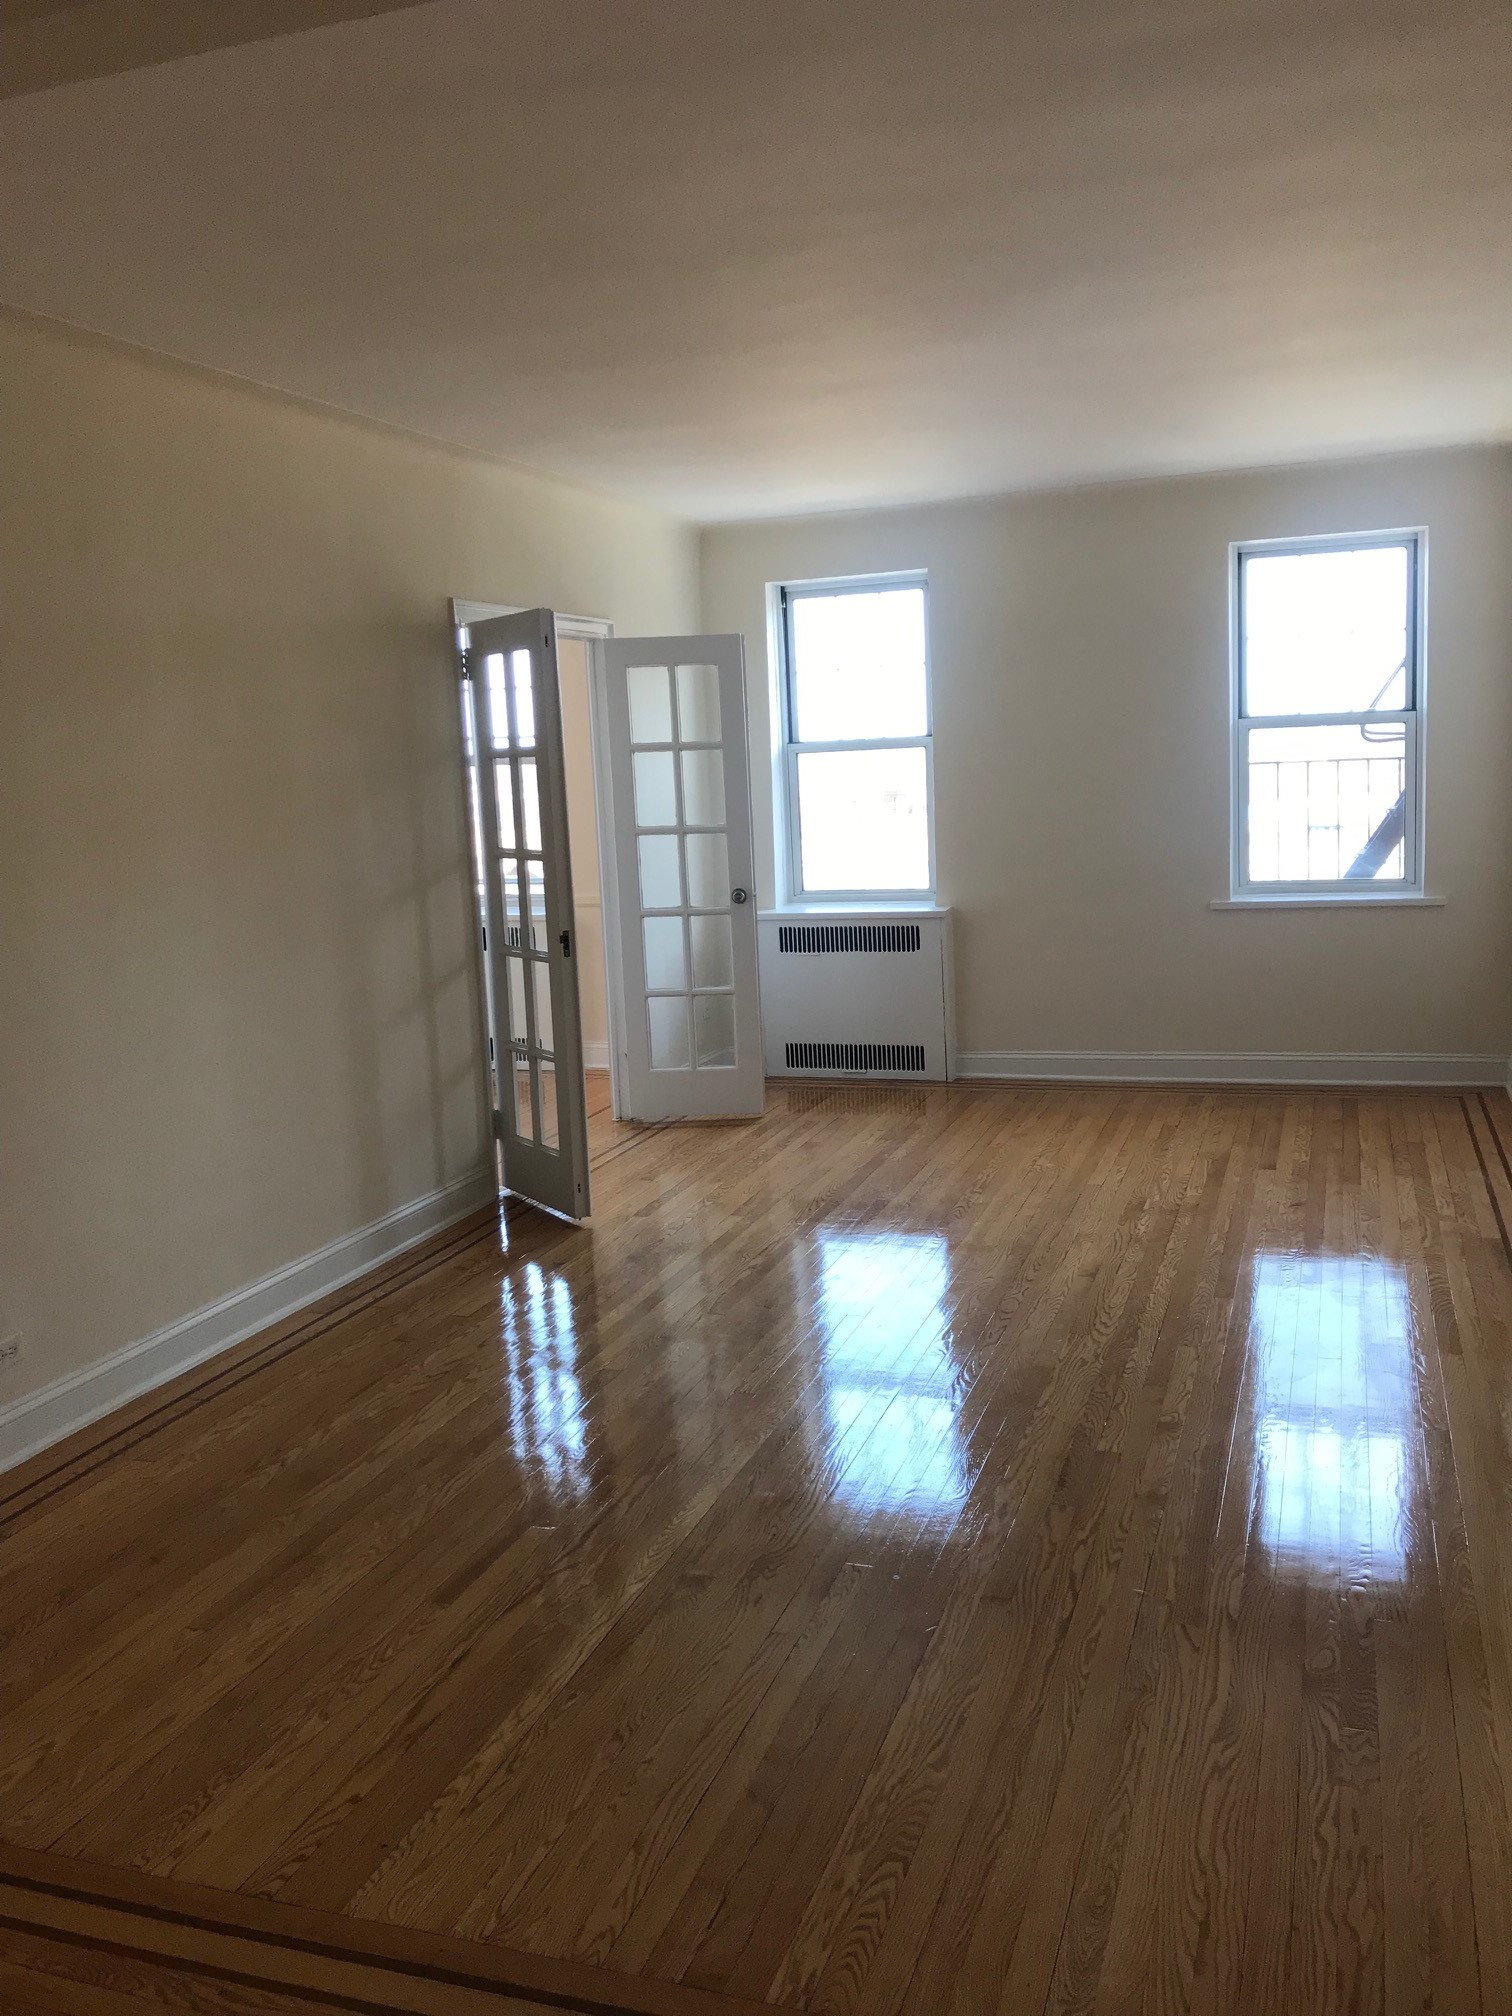 Apartment in Forest Hills - 108th Street  Queens, NY 11375